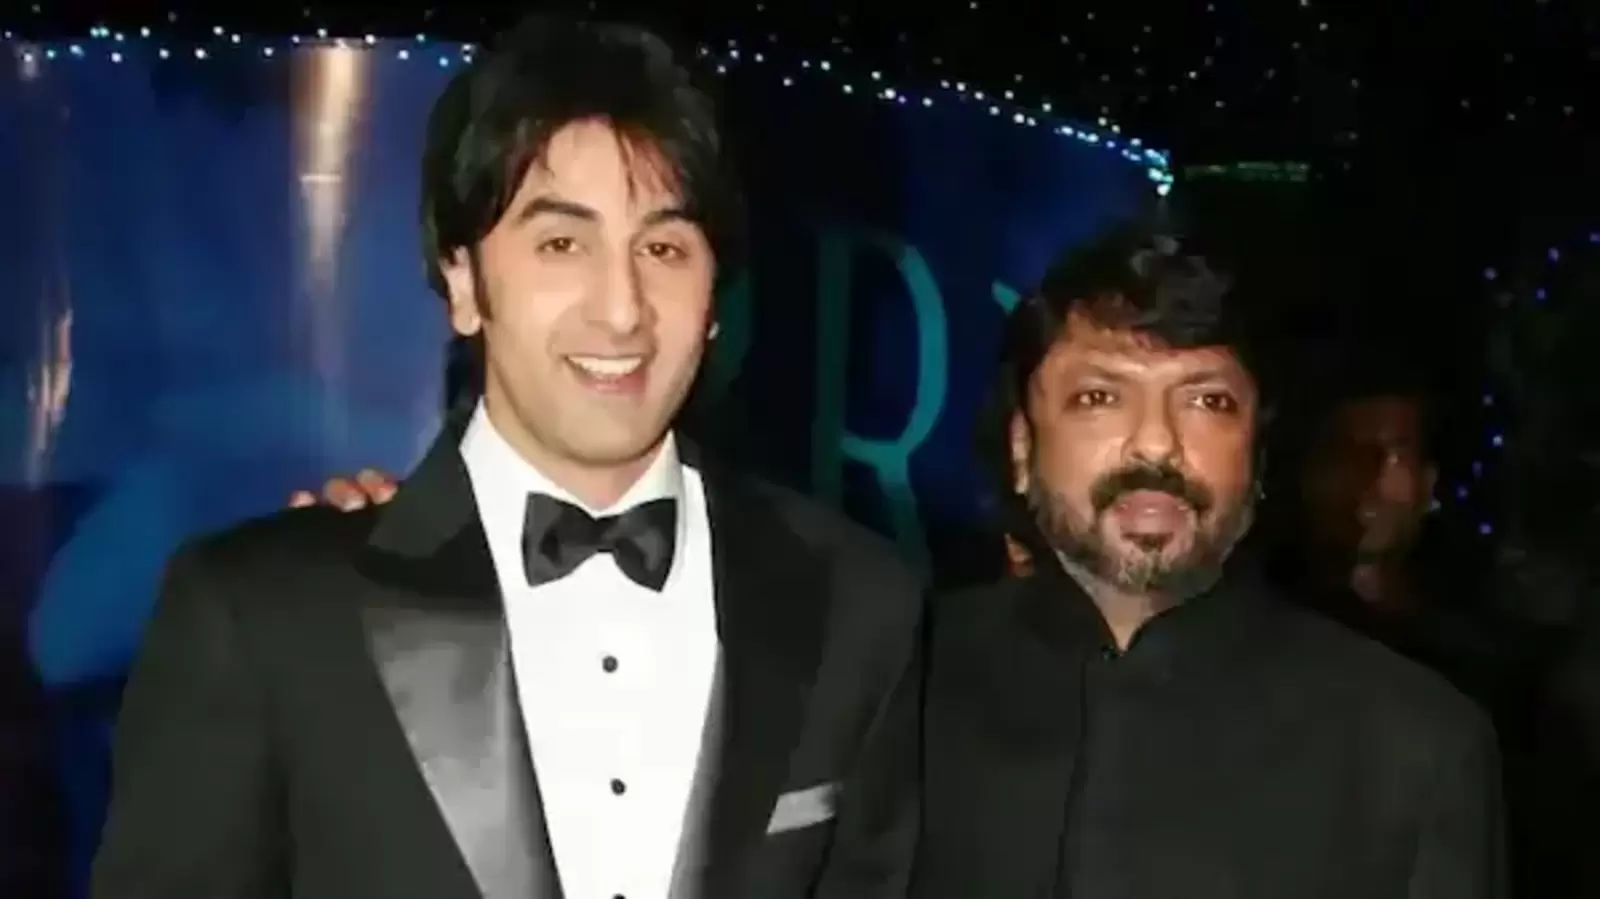 When Ranbir Kapoor said he felt ‘tortured’ while working with Sanjay Leela Bhansali: ‘He was beating me’